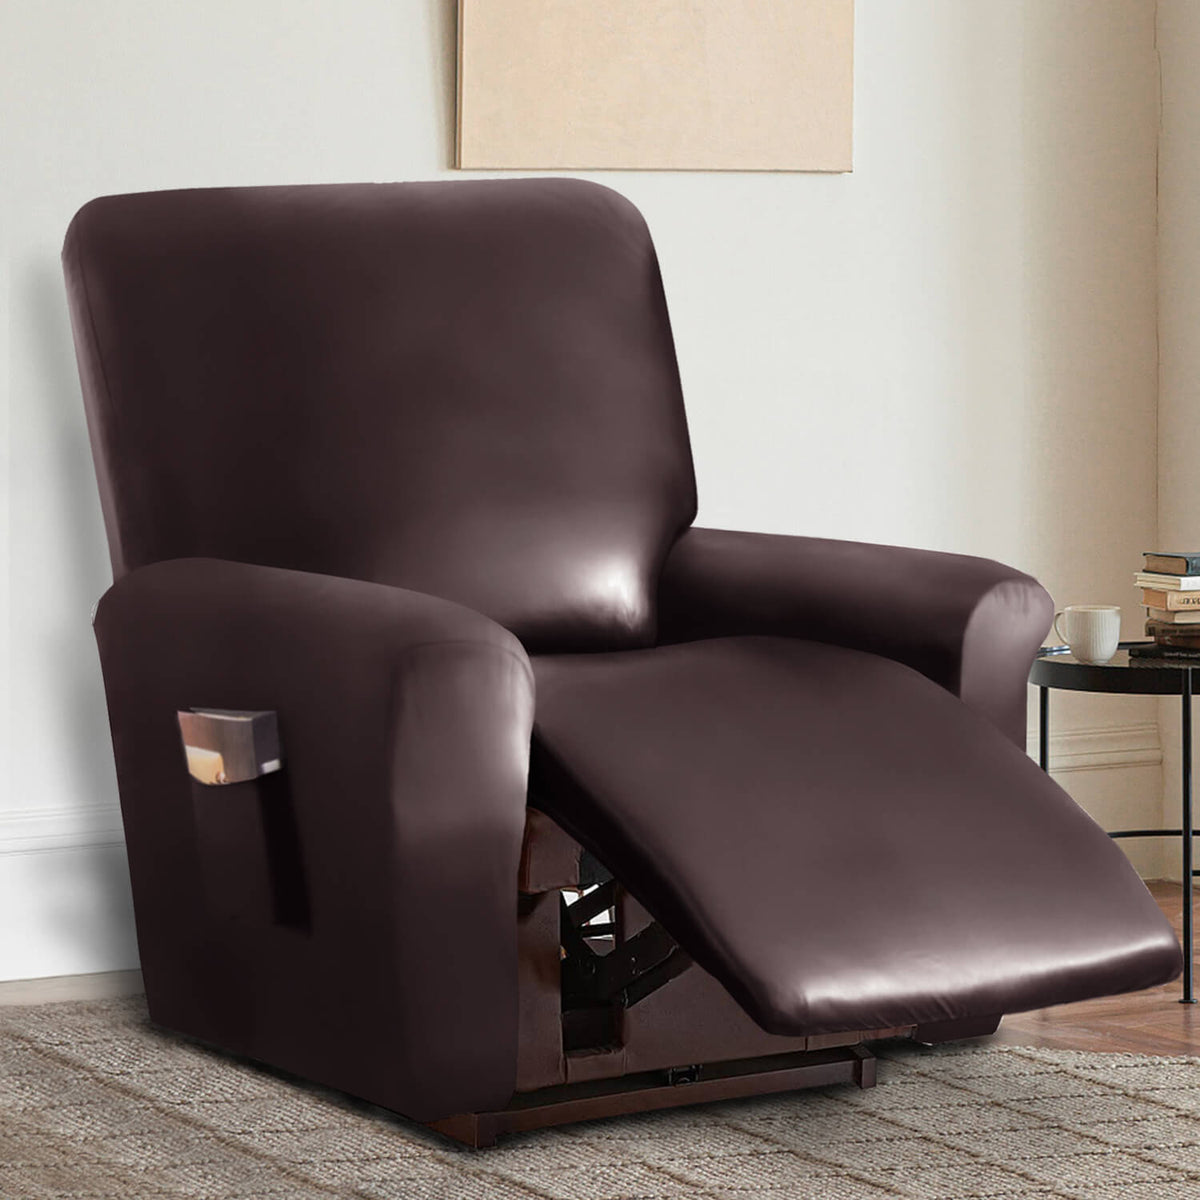 Crfatop Waterproof PU Leather Recliner Slipcover Recliner1-seaterCoffee